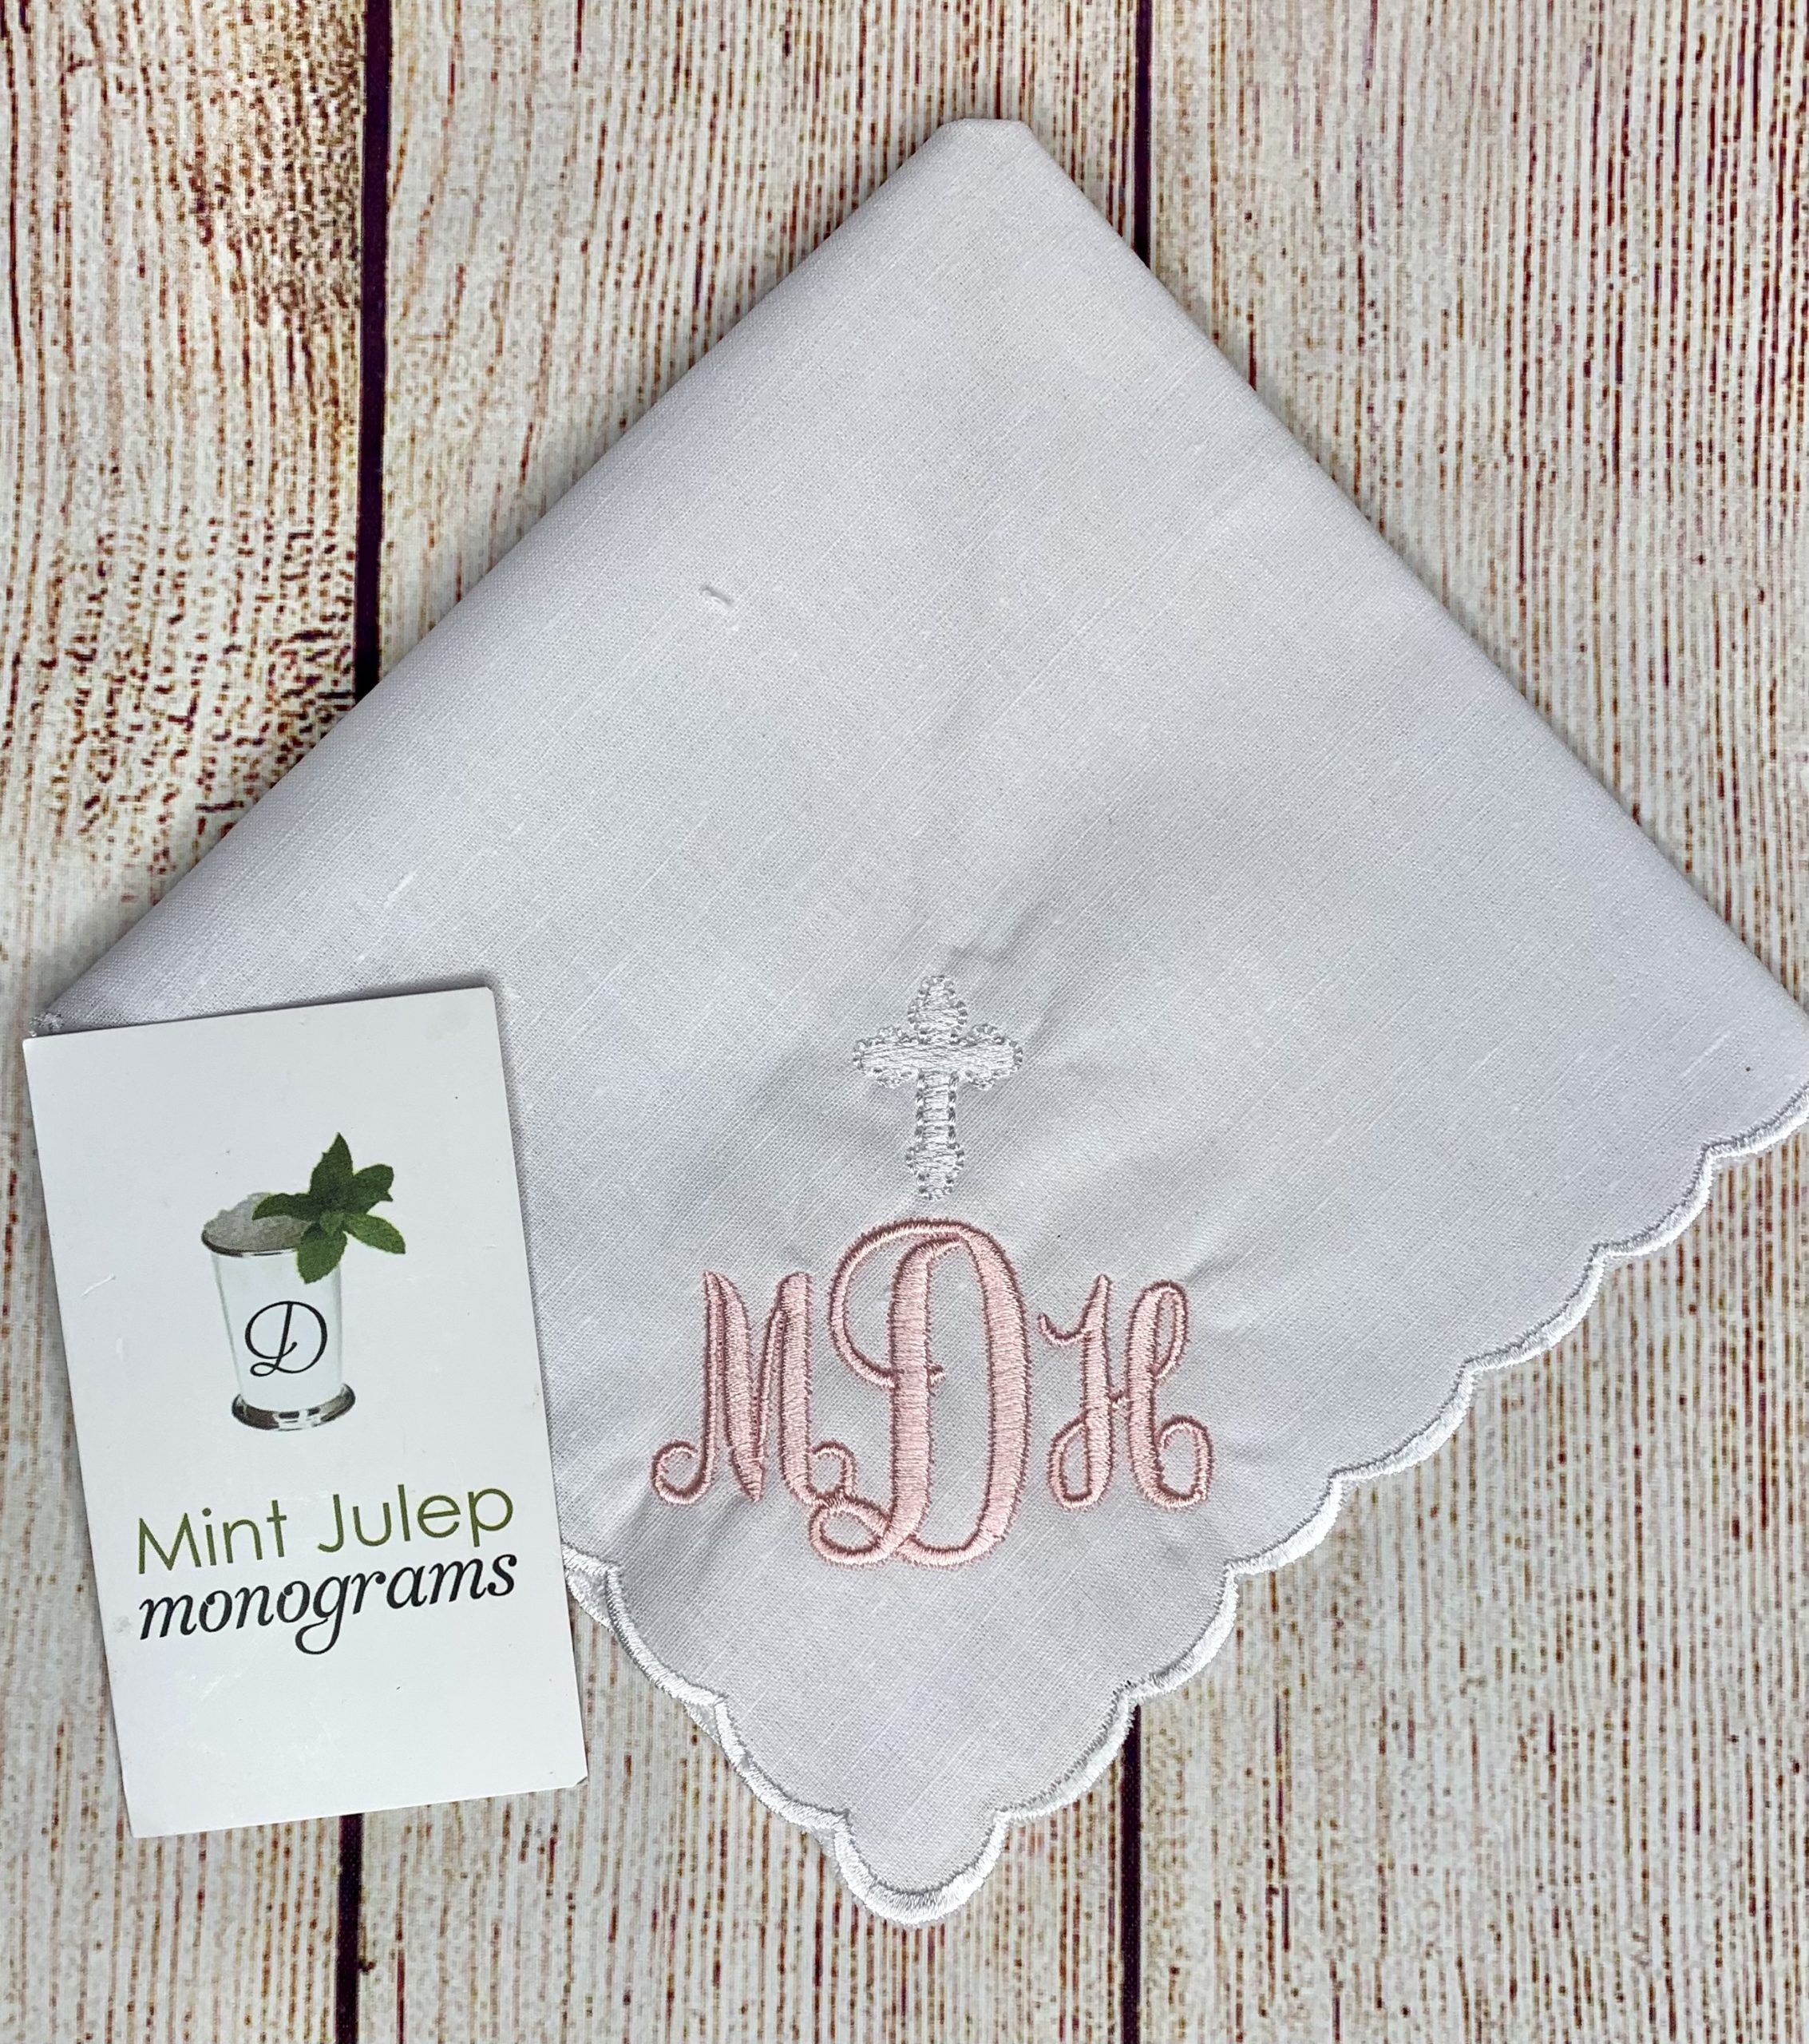 Monogrammed Handkerchief- style for any special occasion